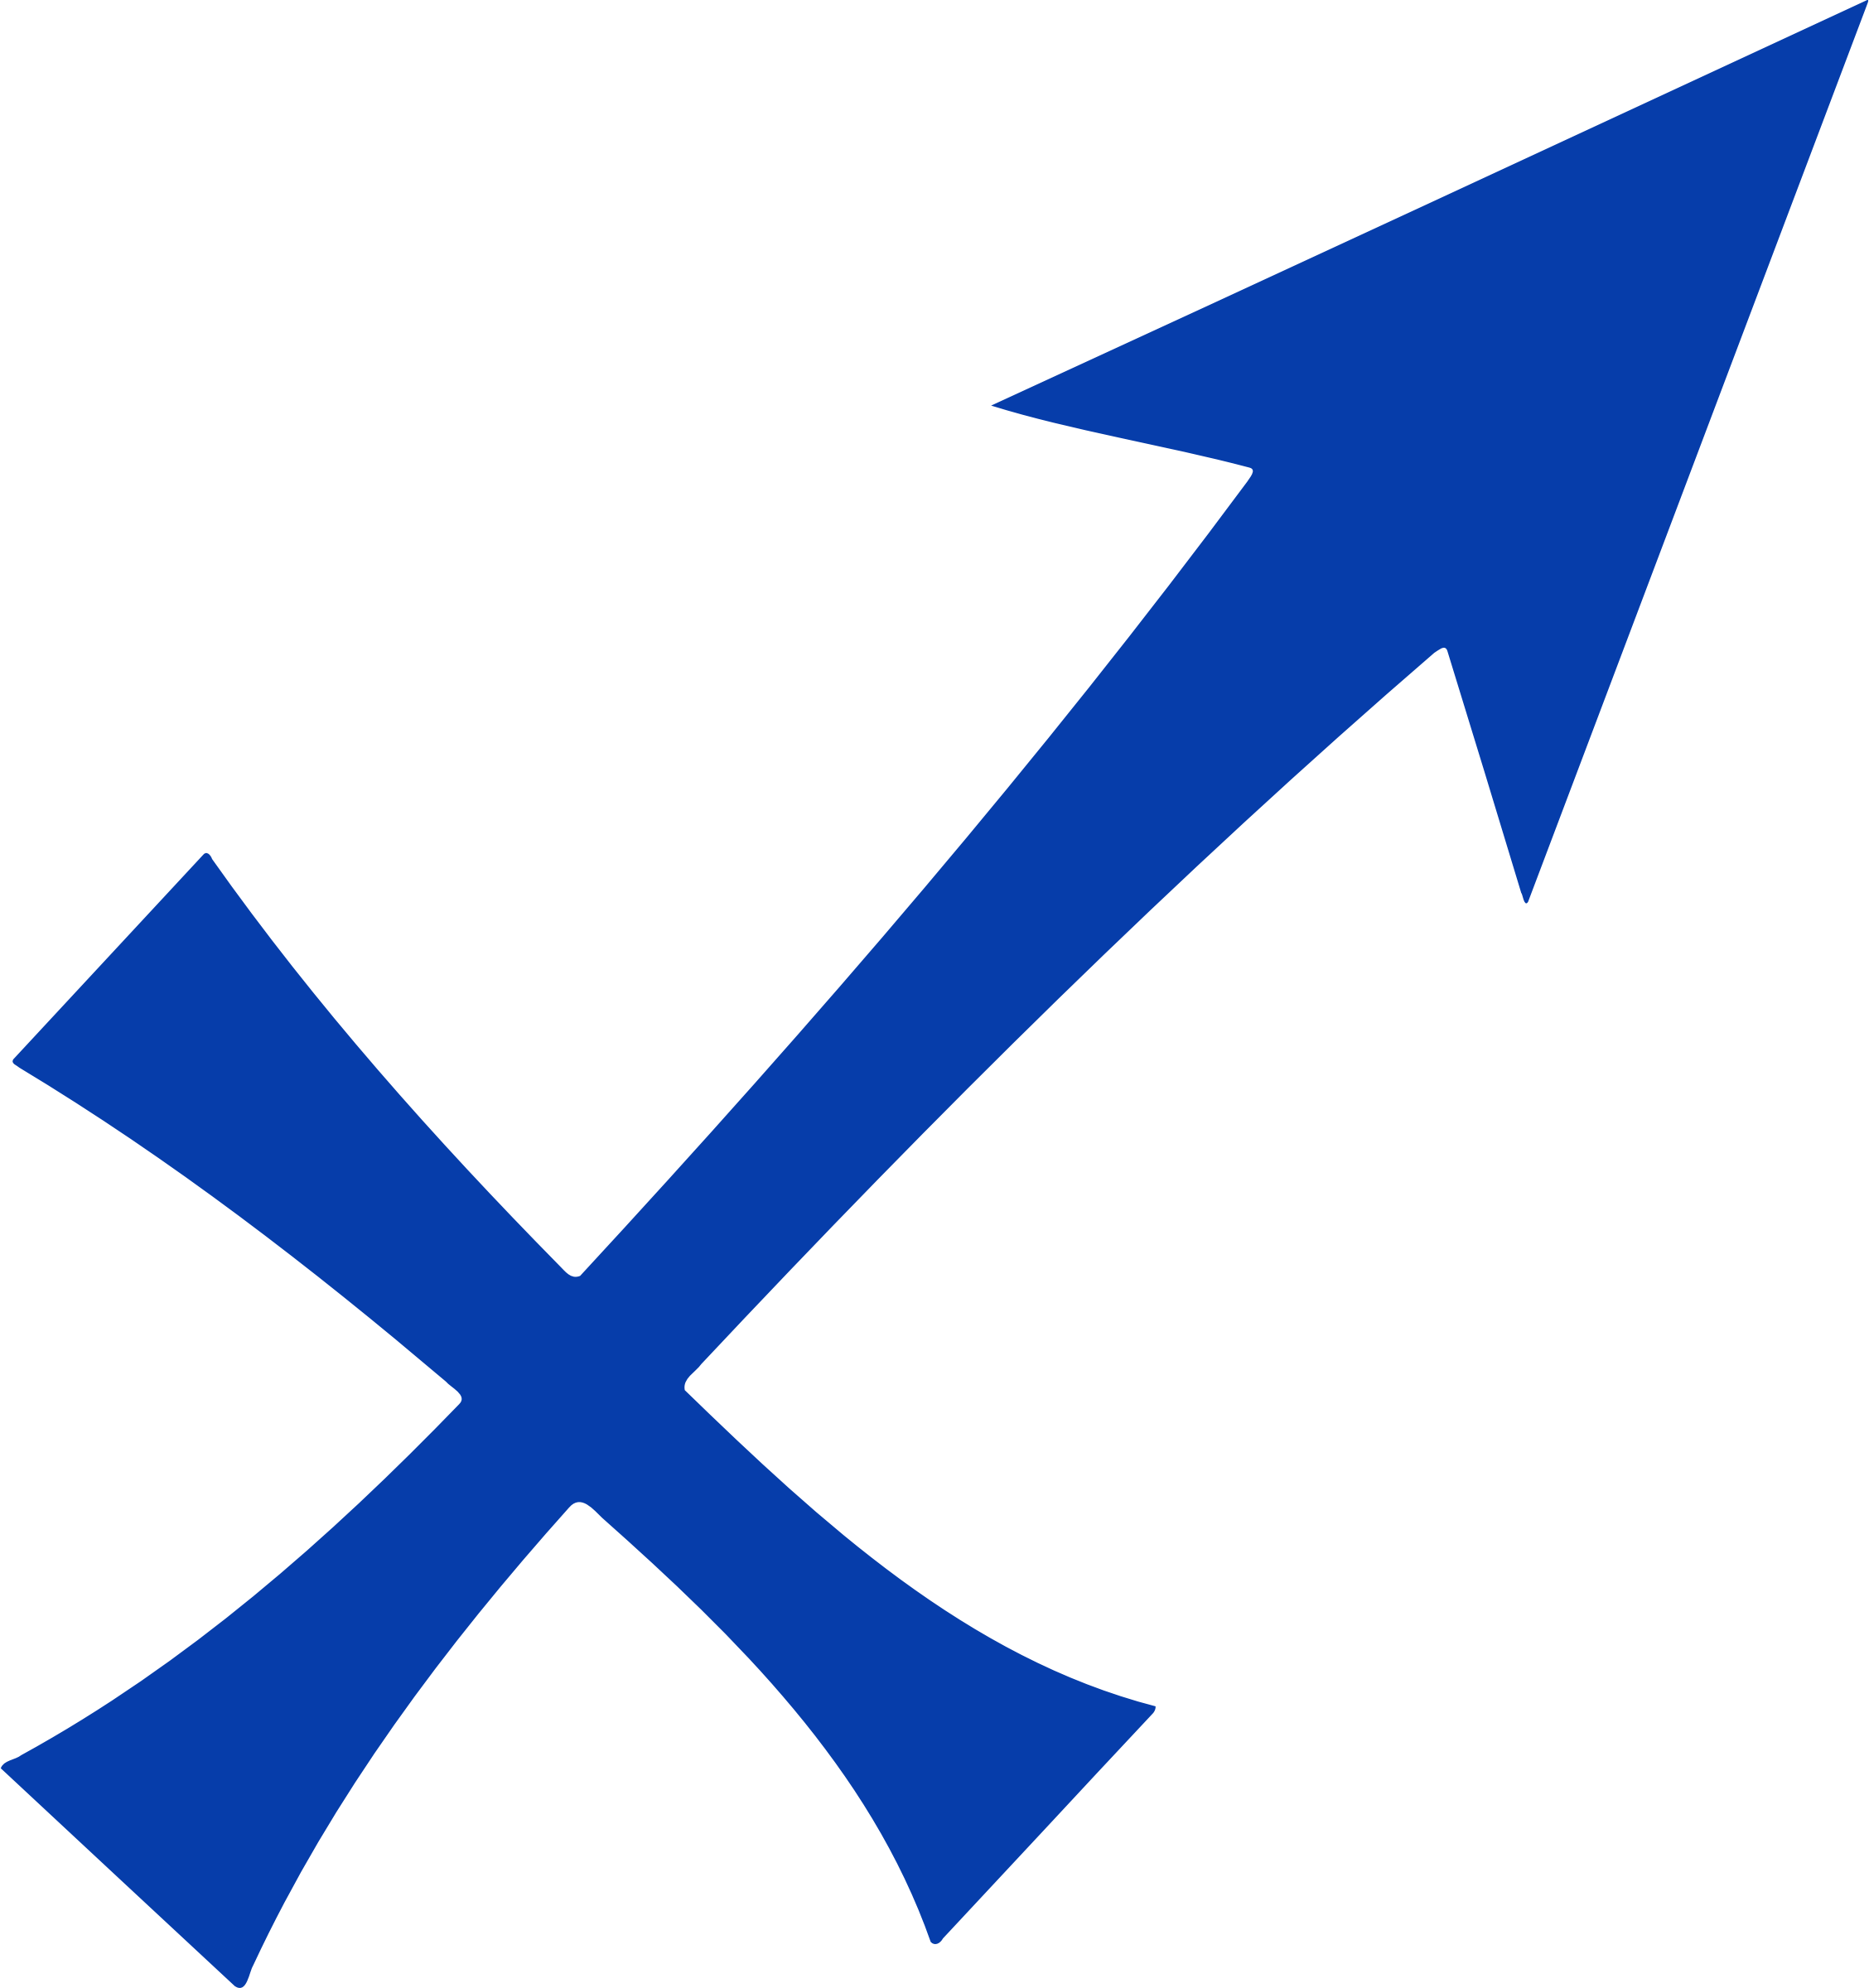 A Blue Symbol With A Cross